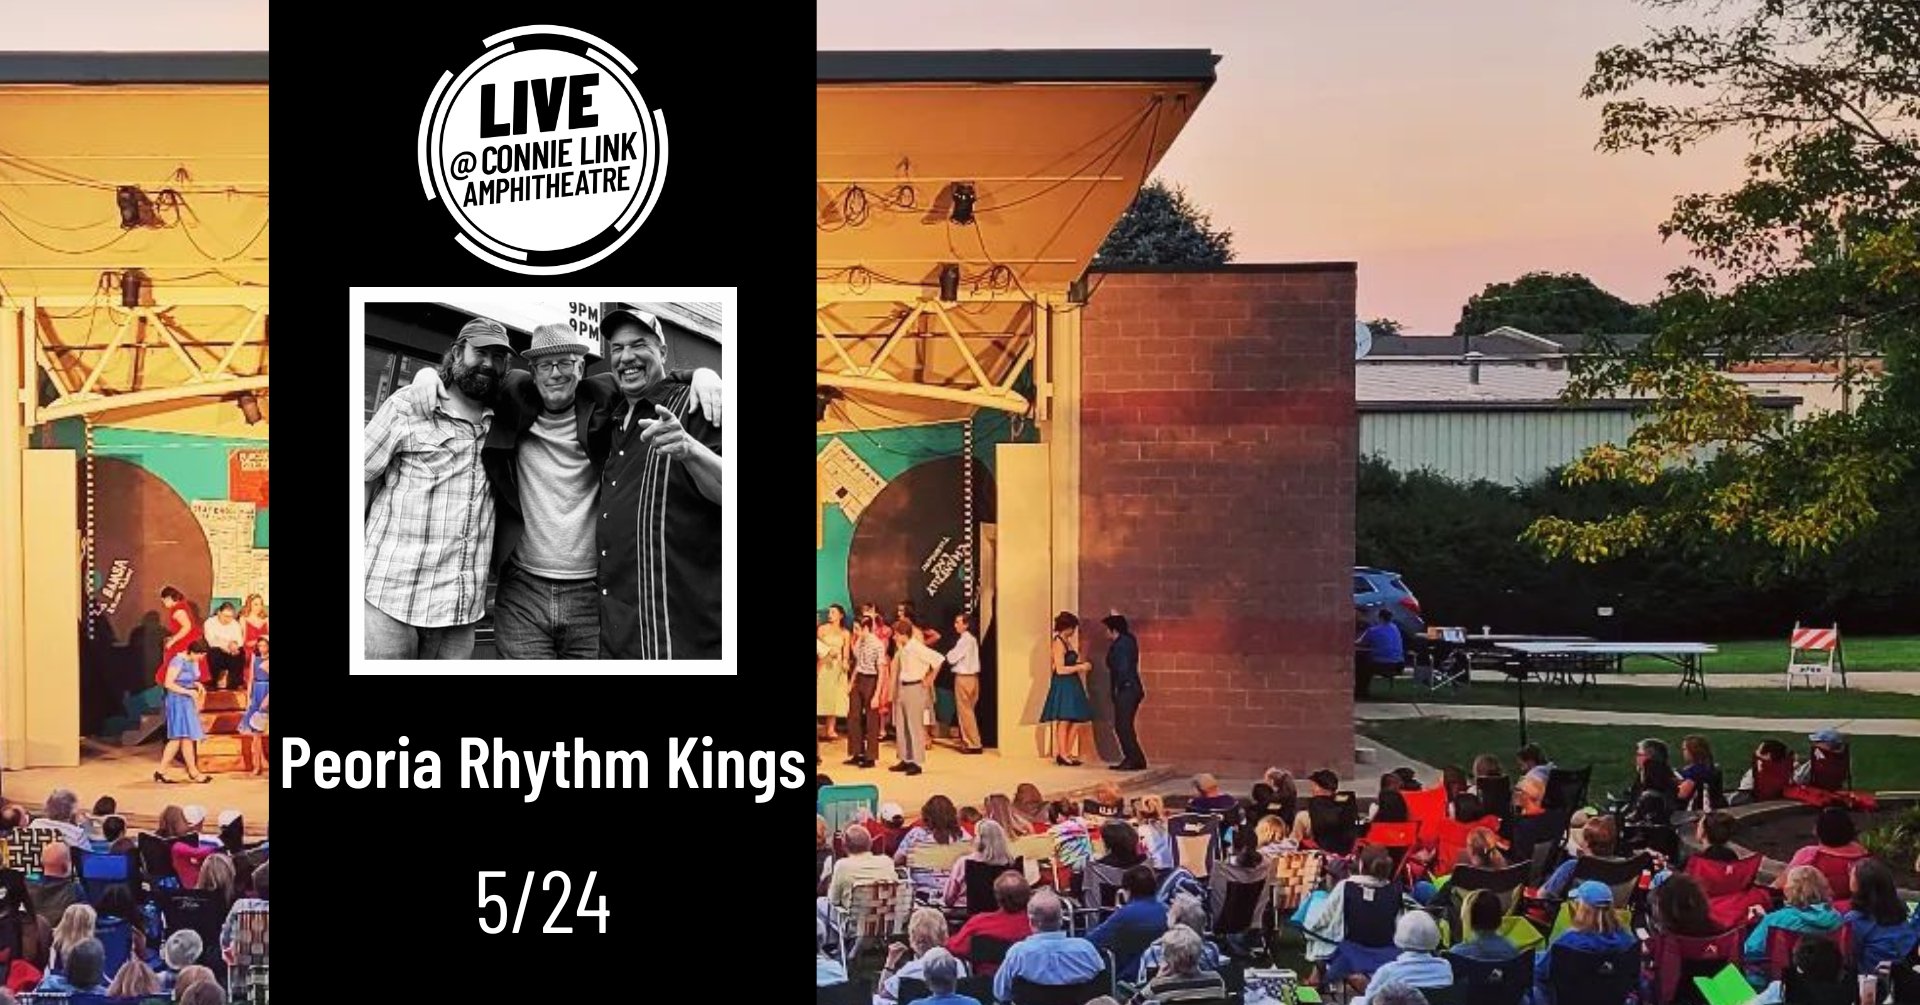 Normal LIVE presents Peoria Rhythm Kings @ Connie Link Amphitheatre